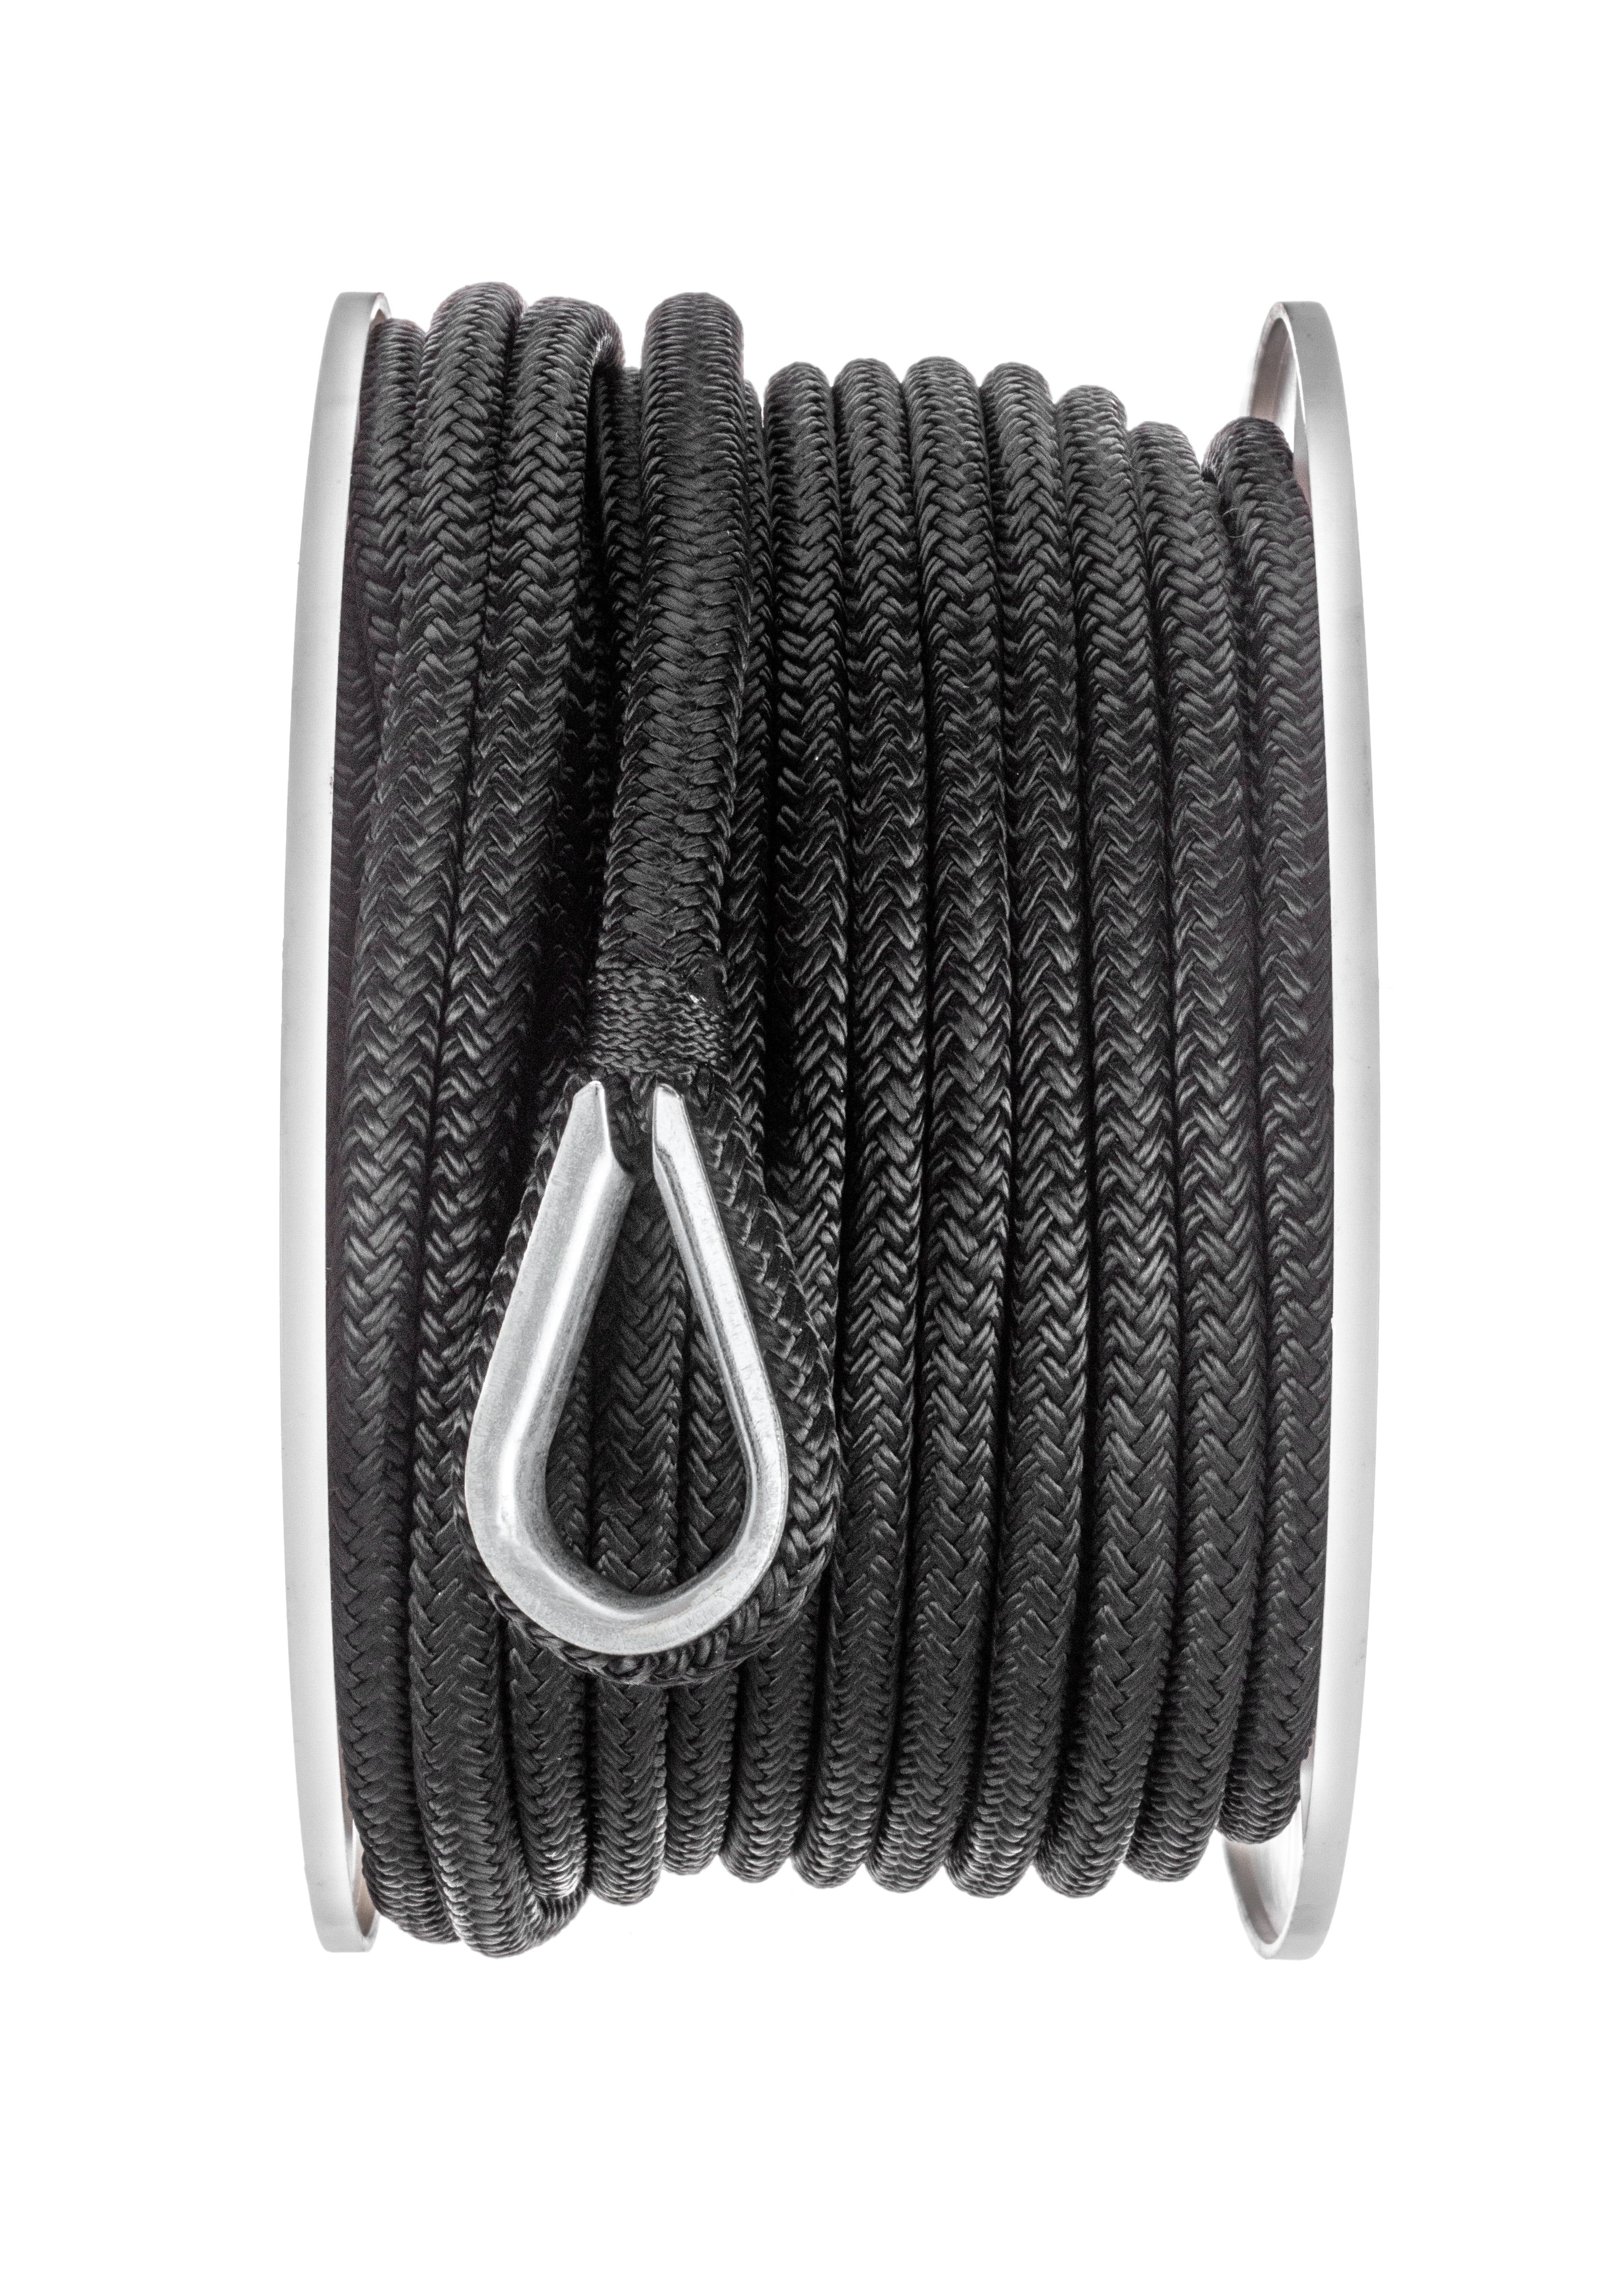 DasMarine 50 ft Anchor Line,Double Braided Nylon Anchor Rope with Stainless Steel Thimble and Marine Grade Snap Hook,Black Anchor Rope Braided Anchor Line 3/8 Diameter